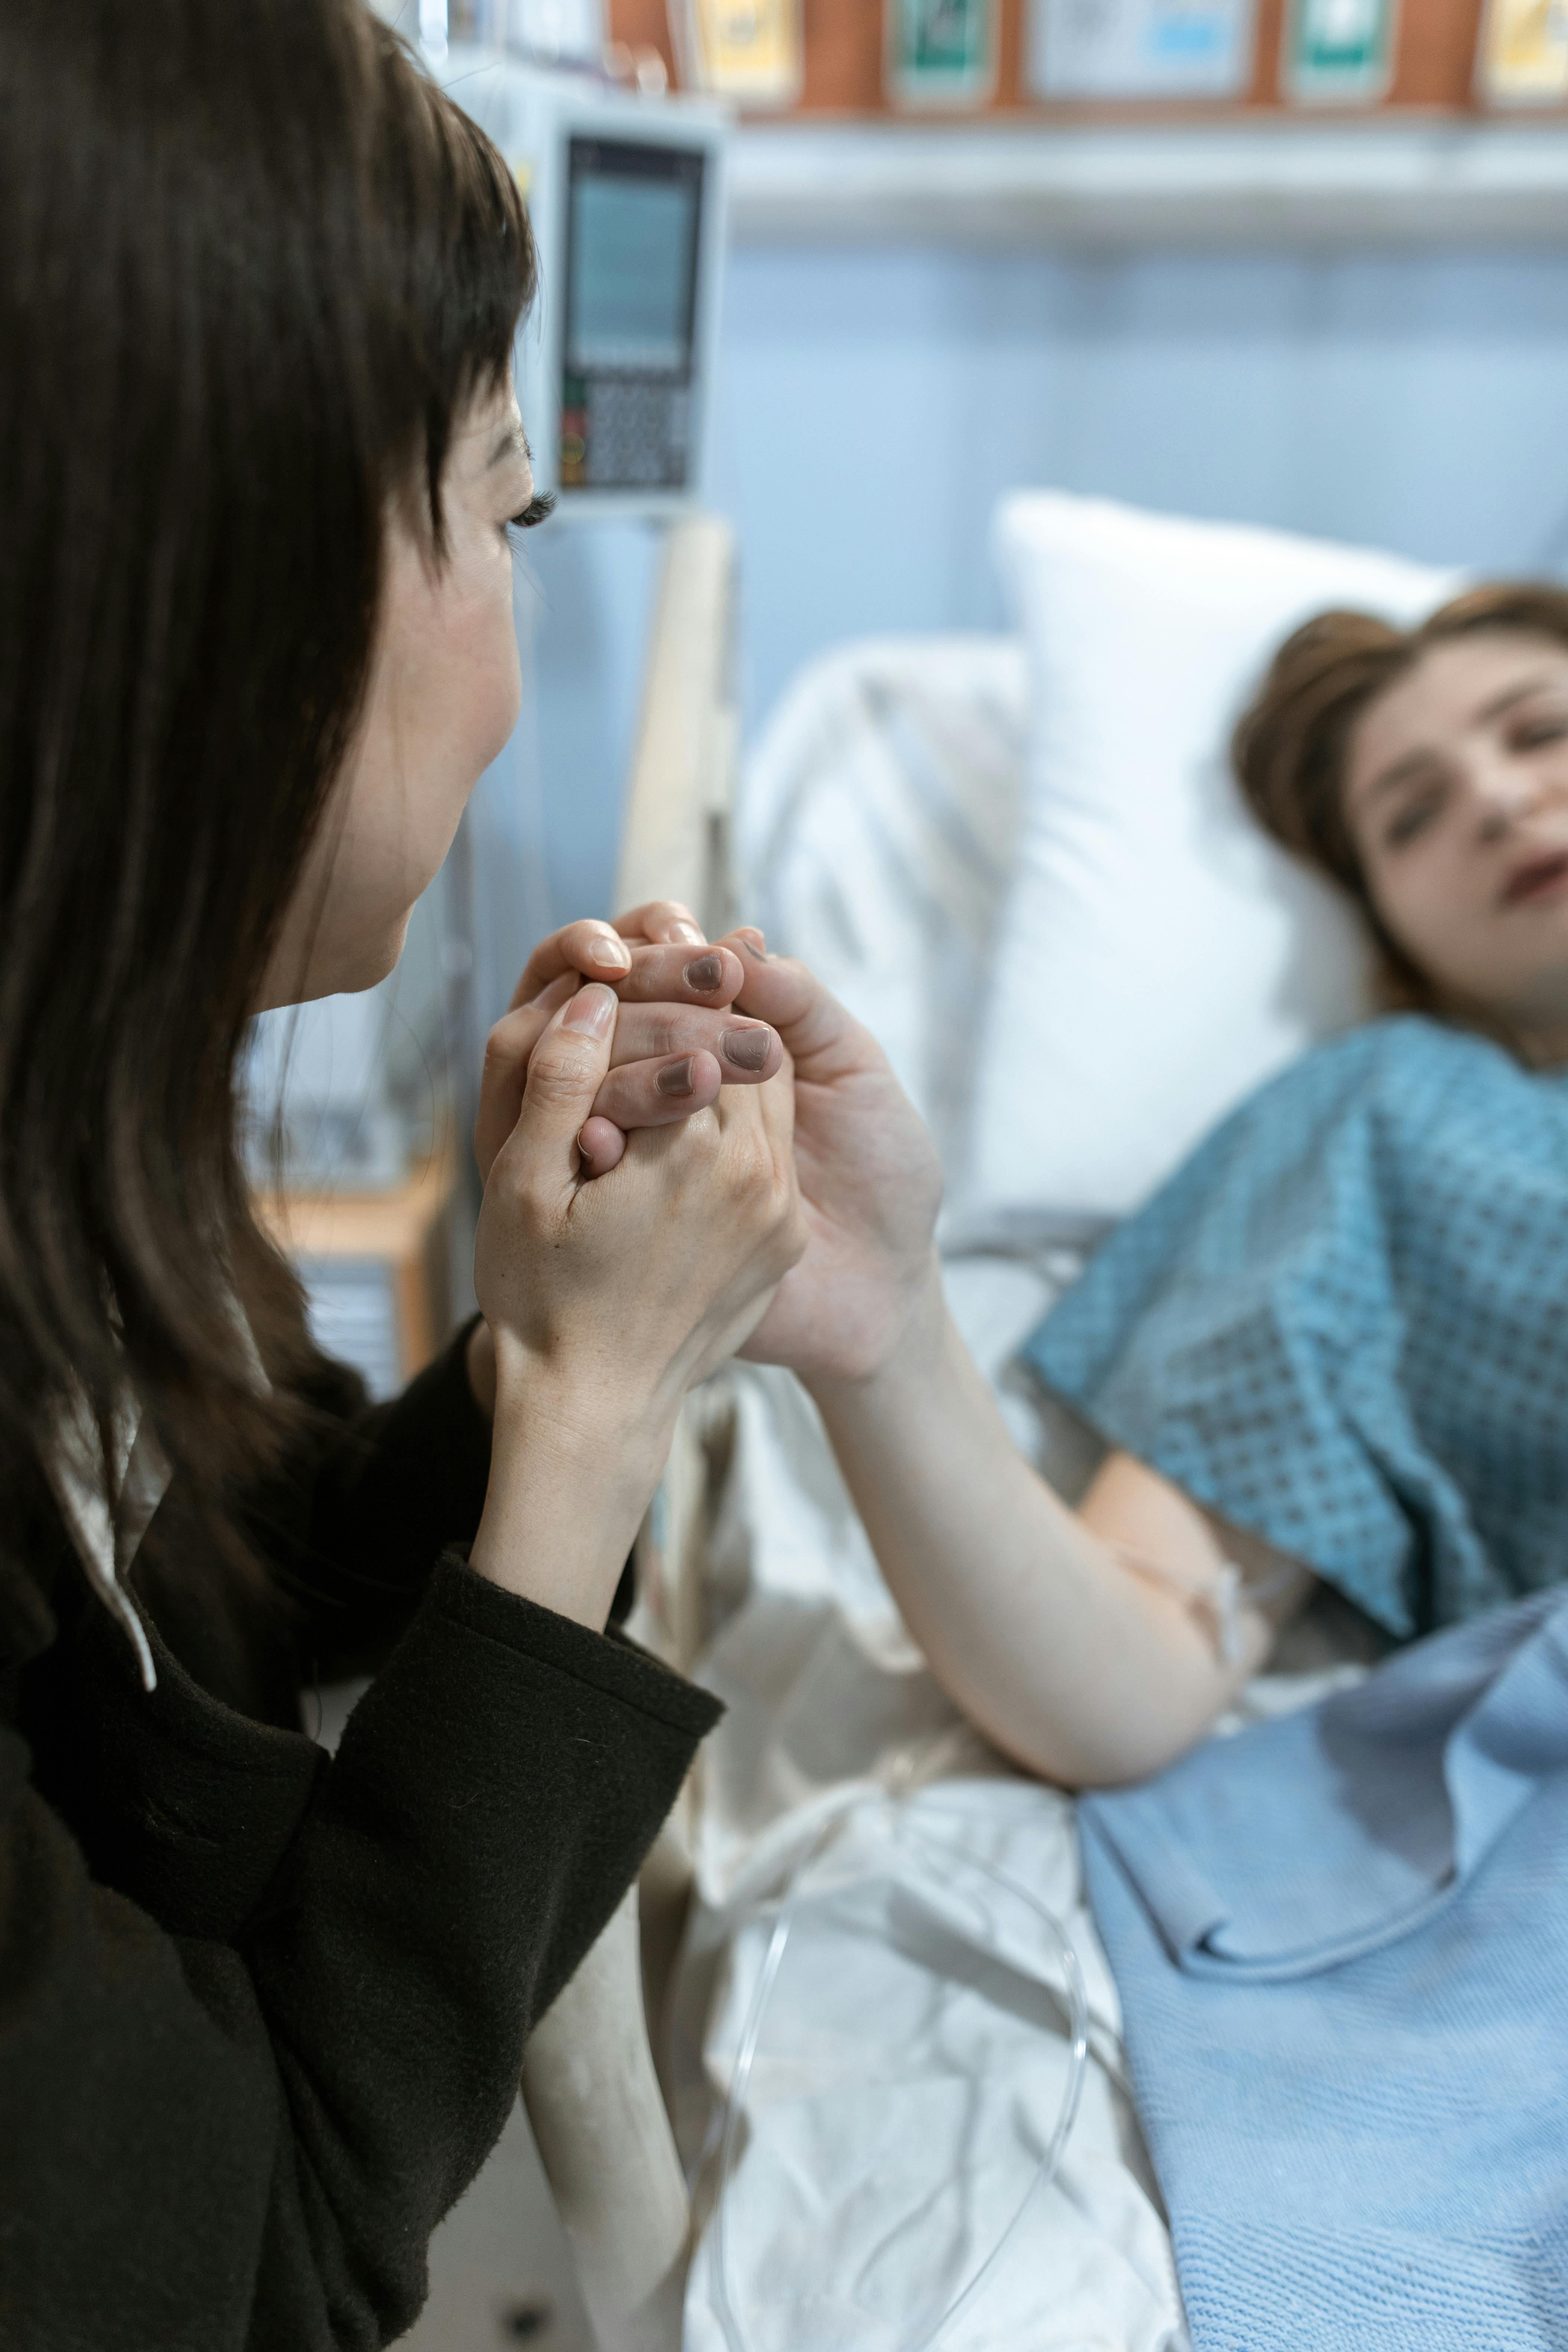 Woman holding sick woman's hand | Source: Pexels